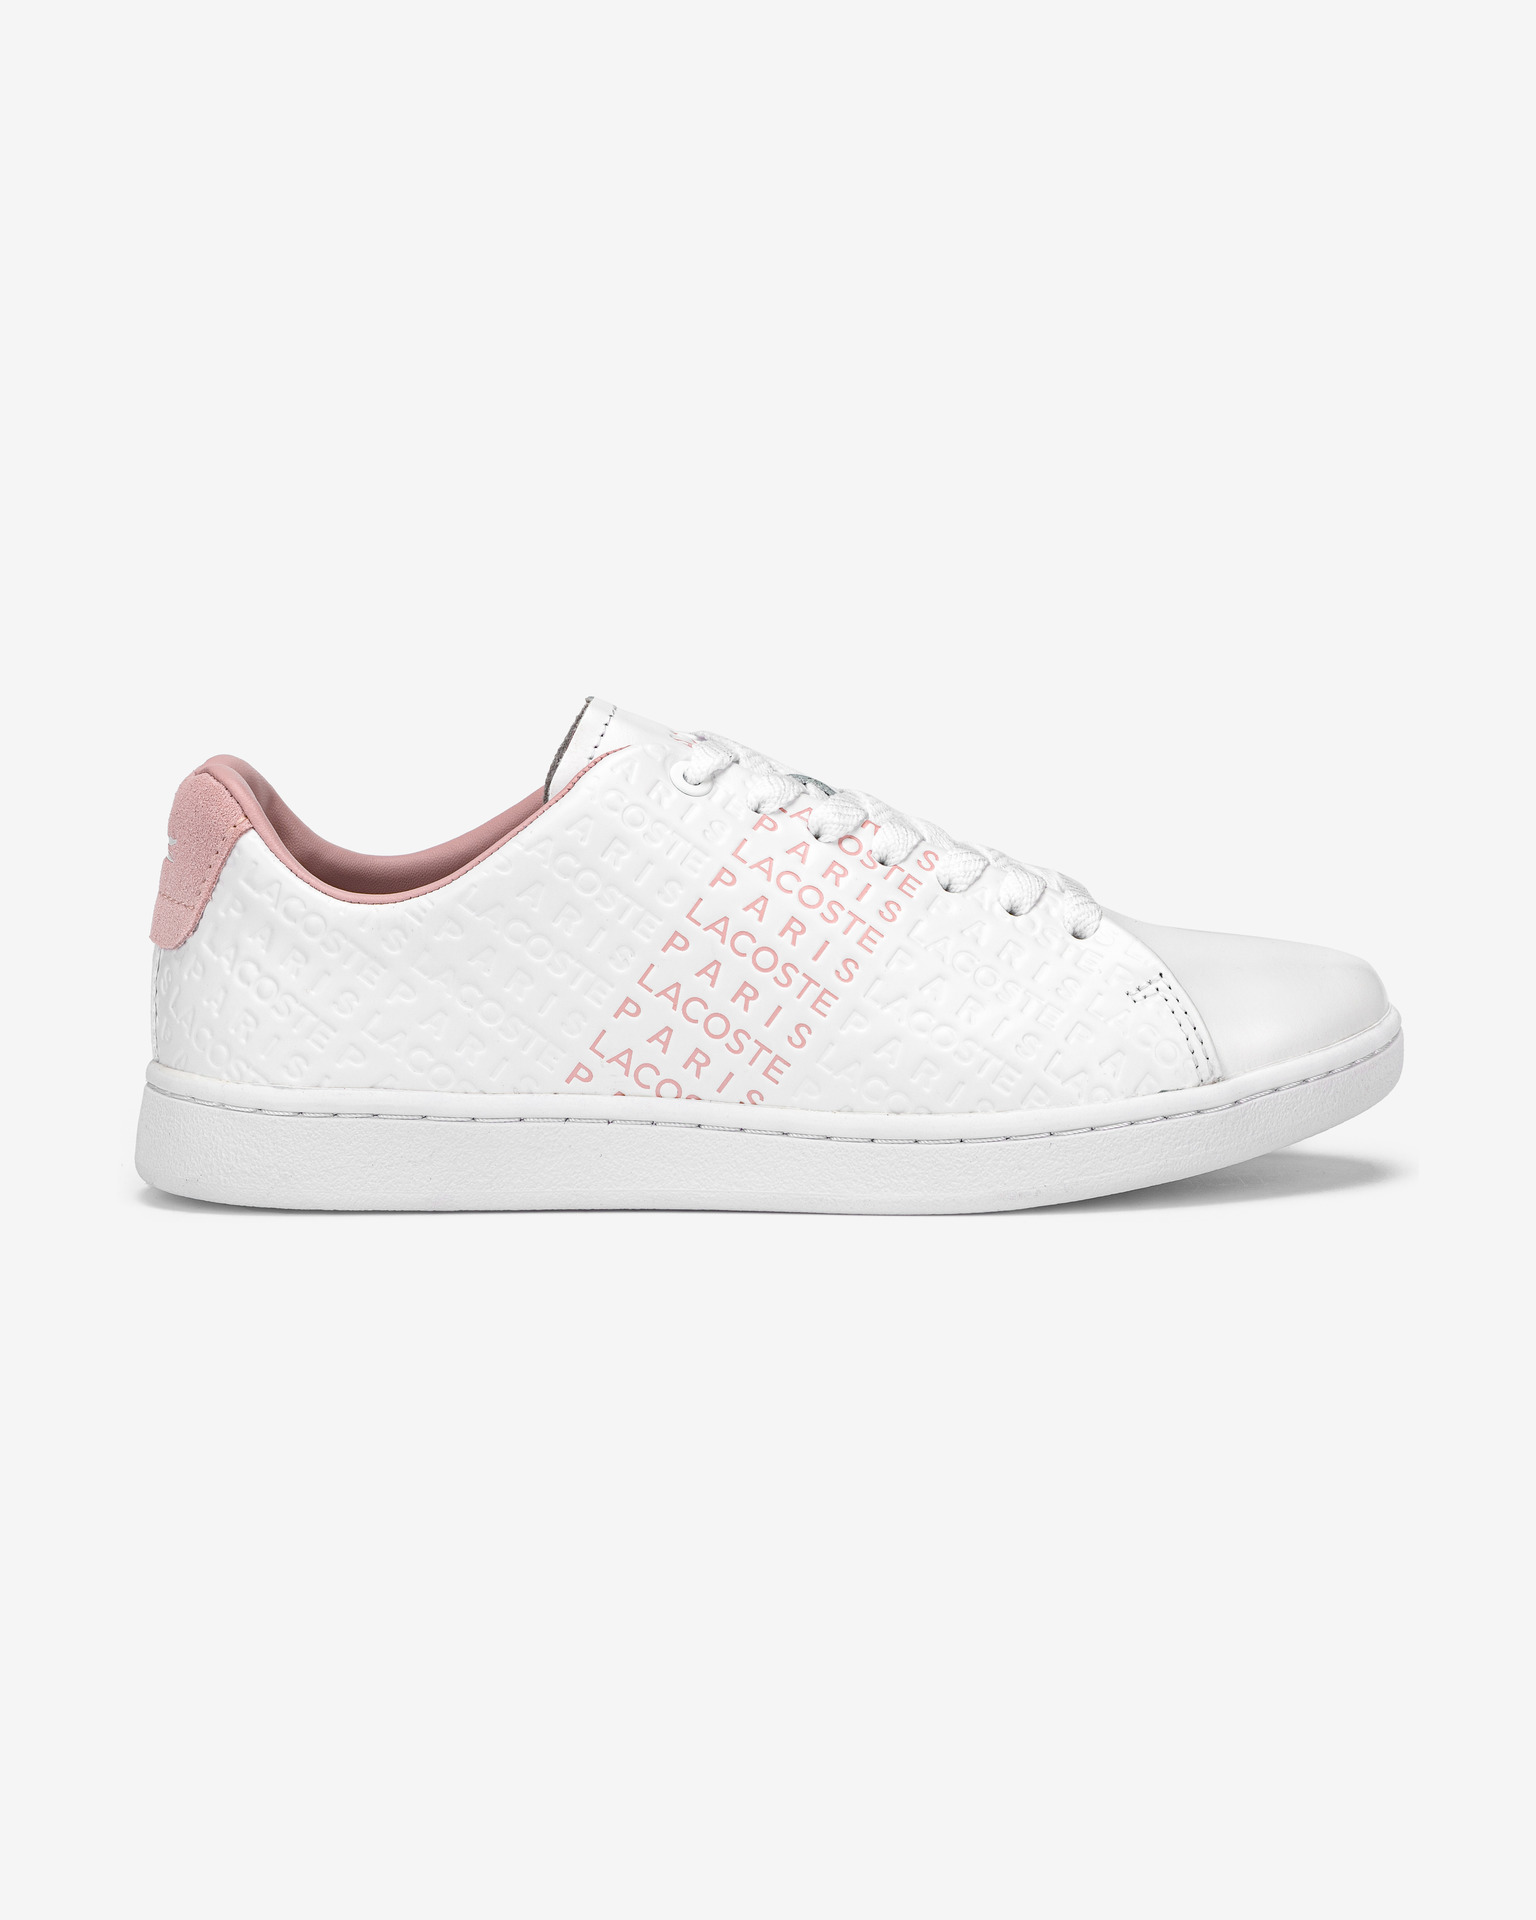 Lacoste Women's Lineshot Leather Casual Sneakers from Finish Line |  CoolSprings Galleria